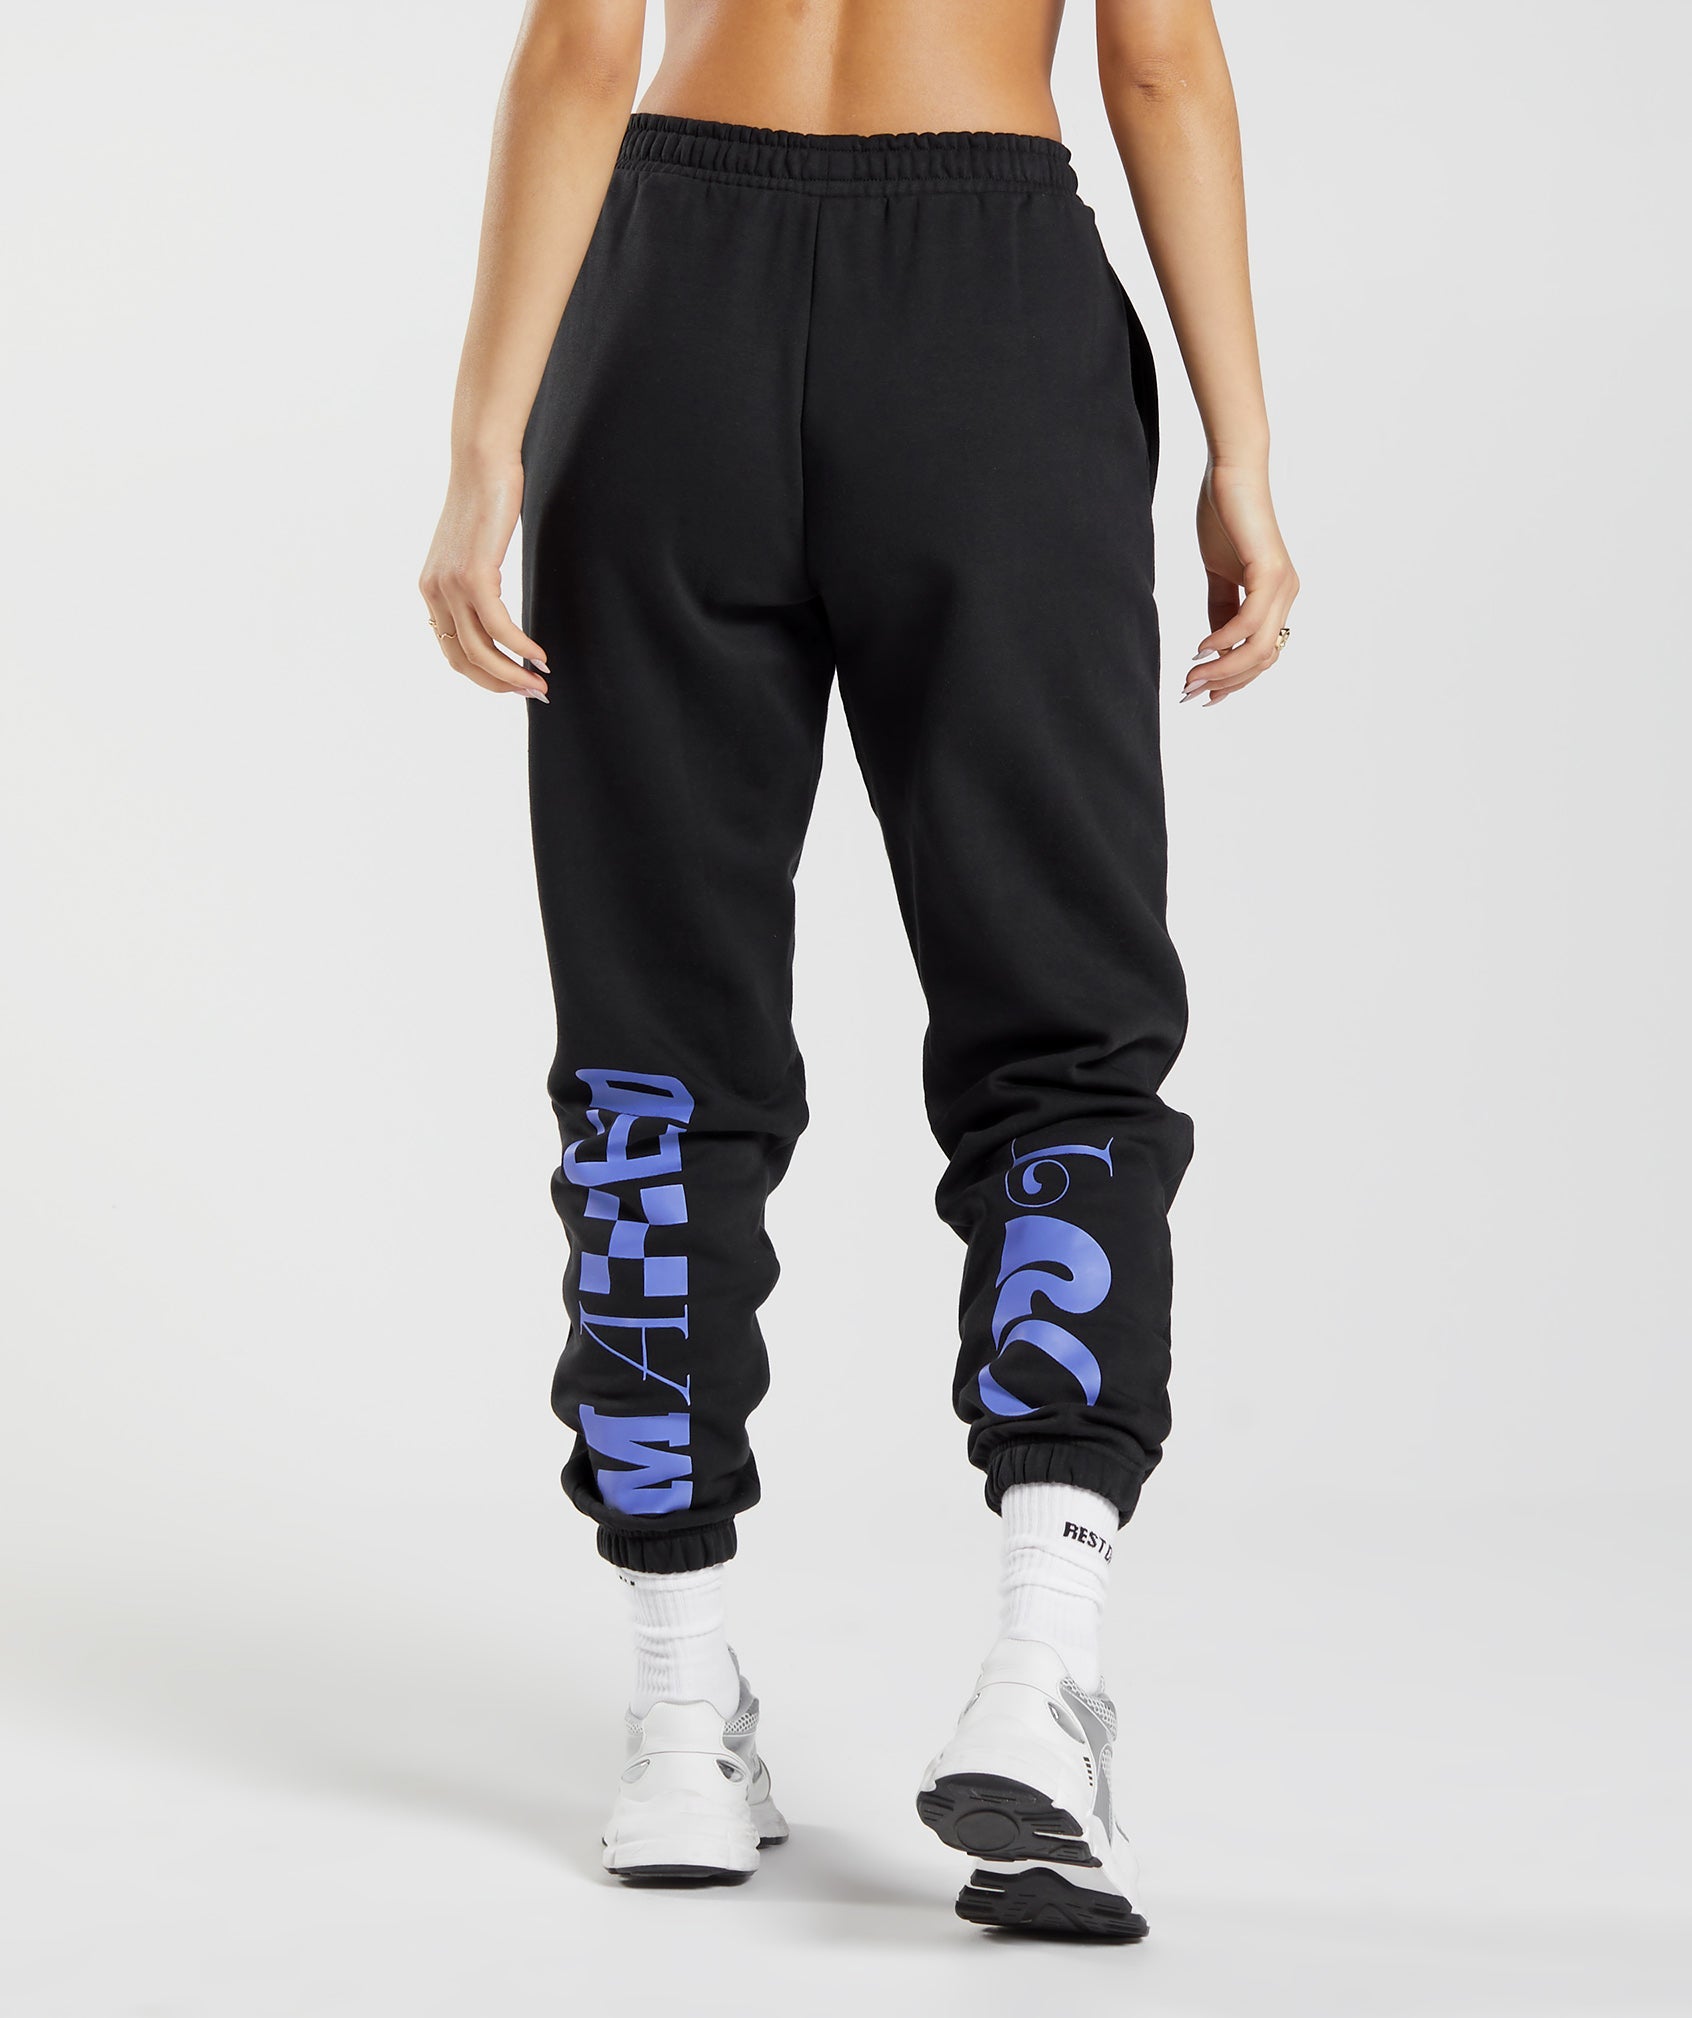 Maxed Out Joggers in Black - view 1